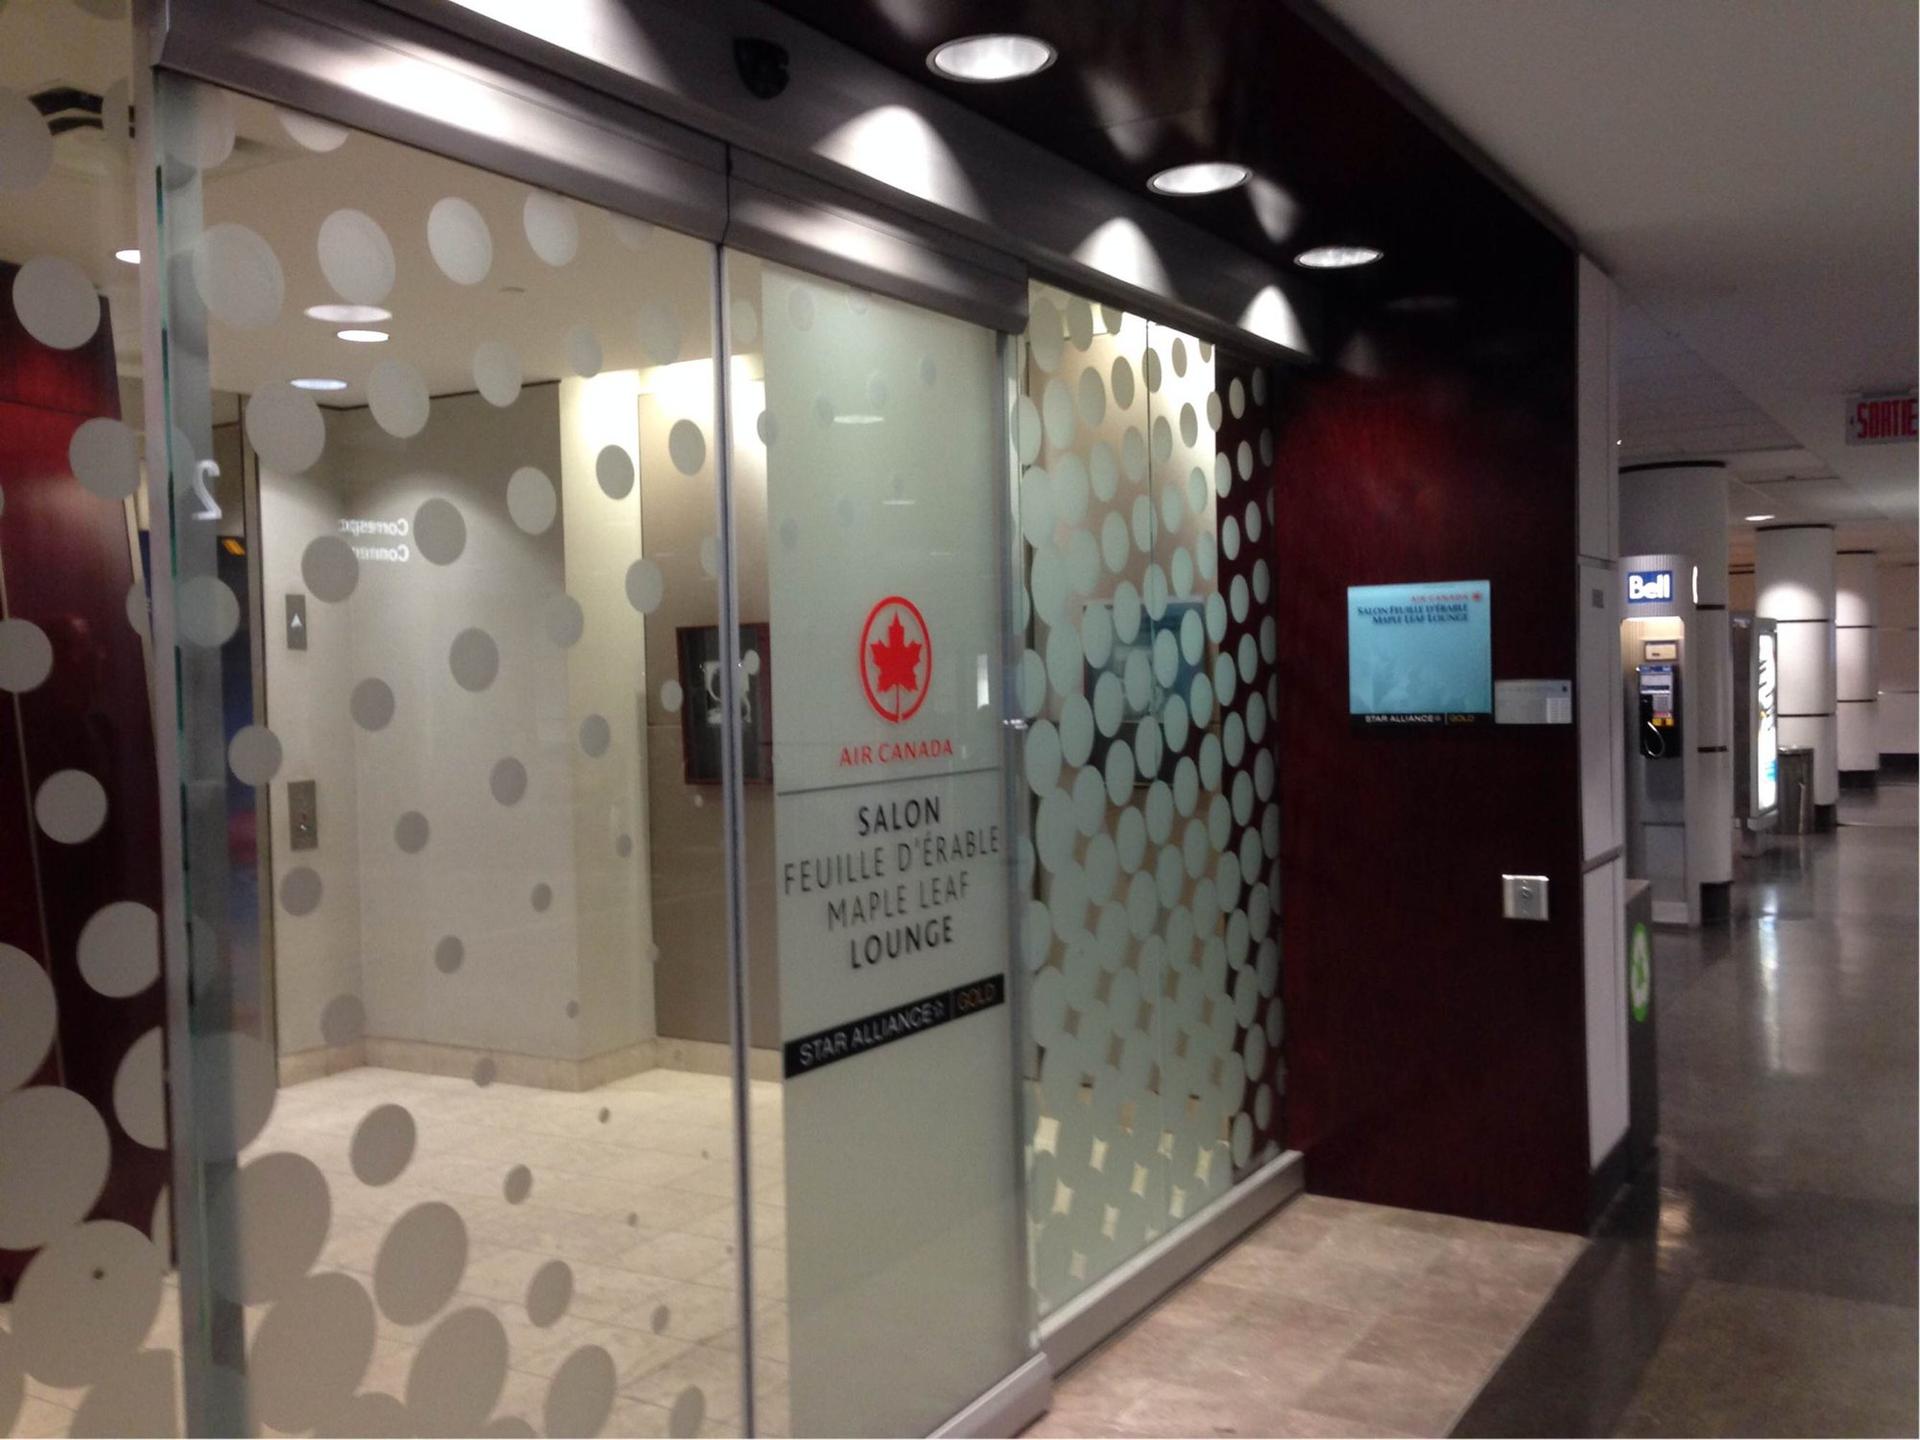 Air Canada Maple Leaf Lounge image 3 of 7